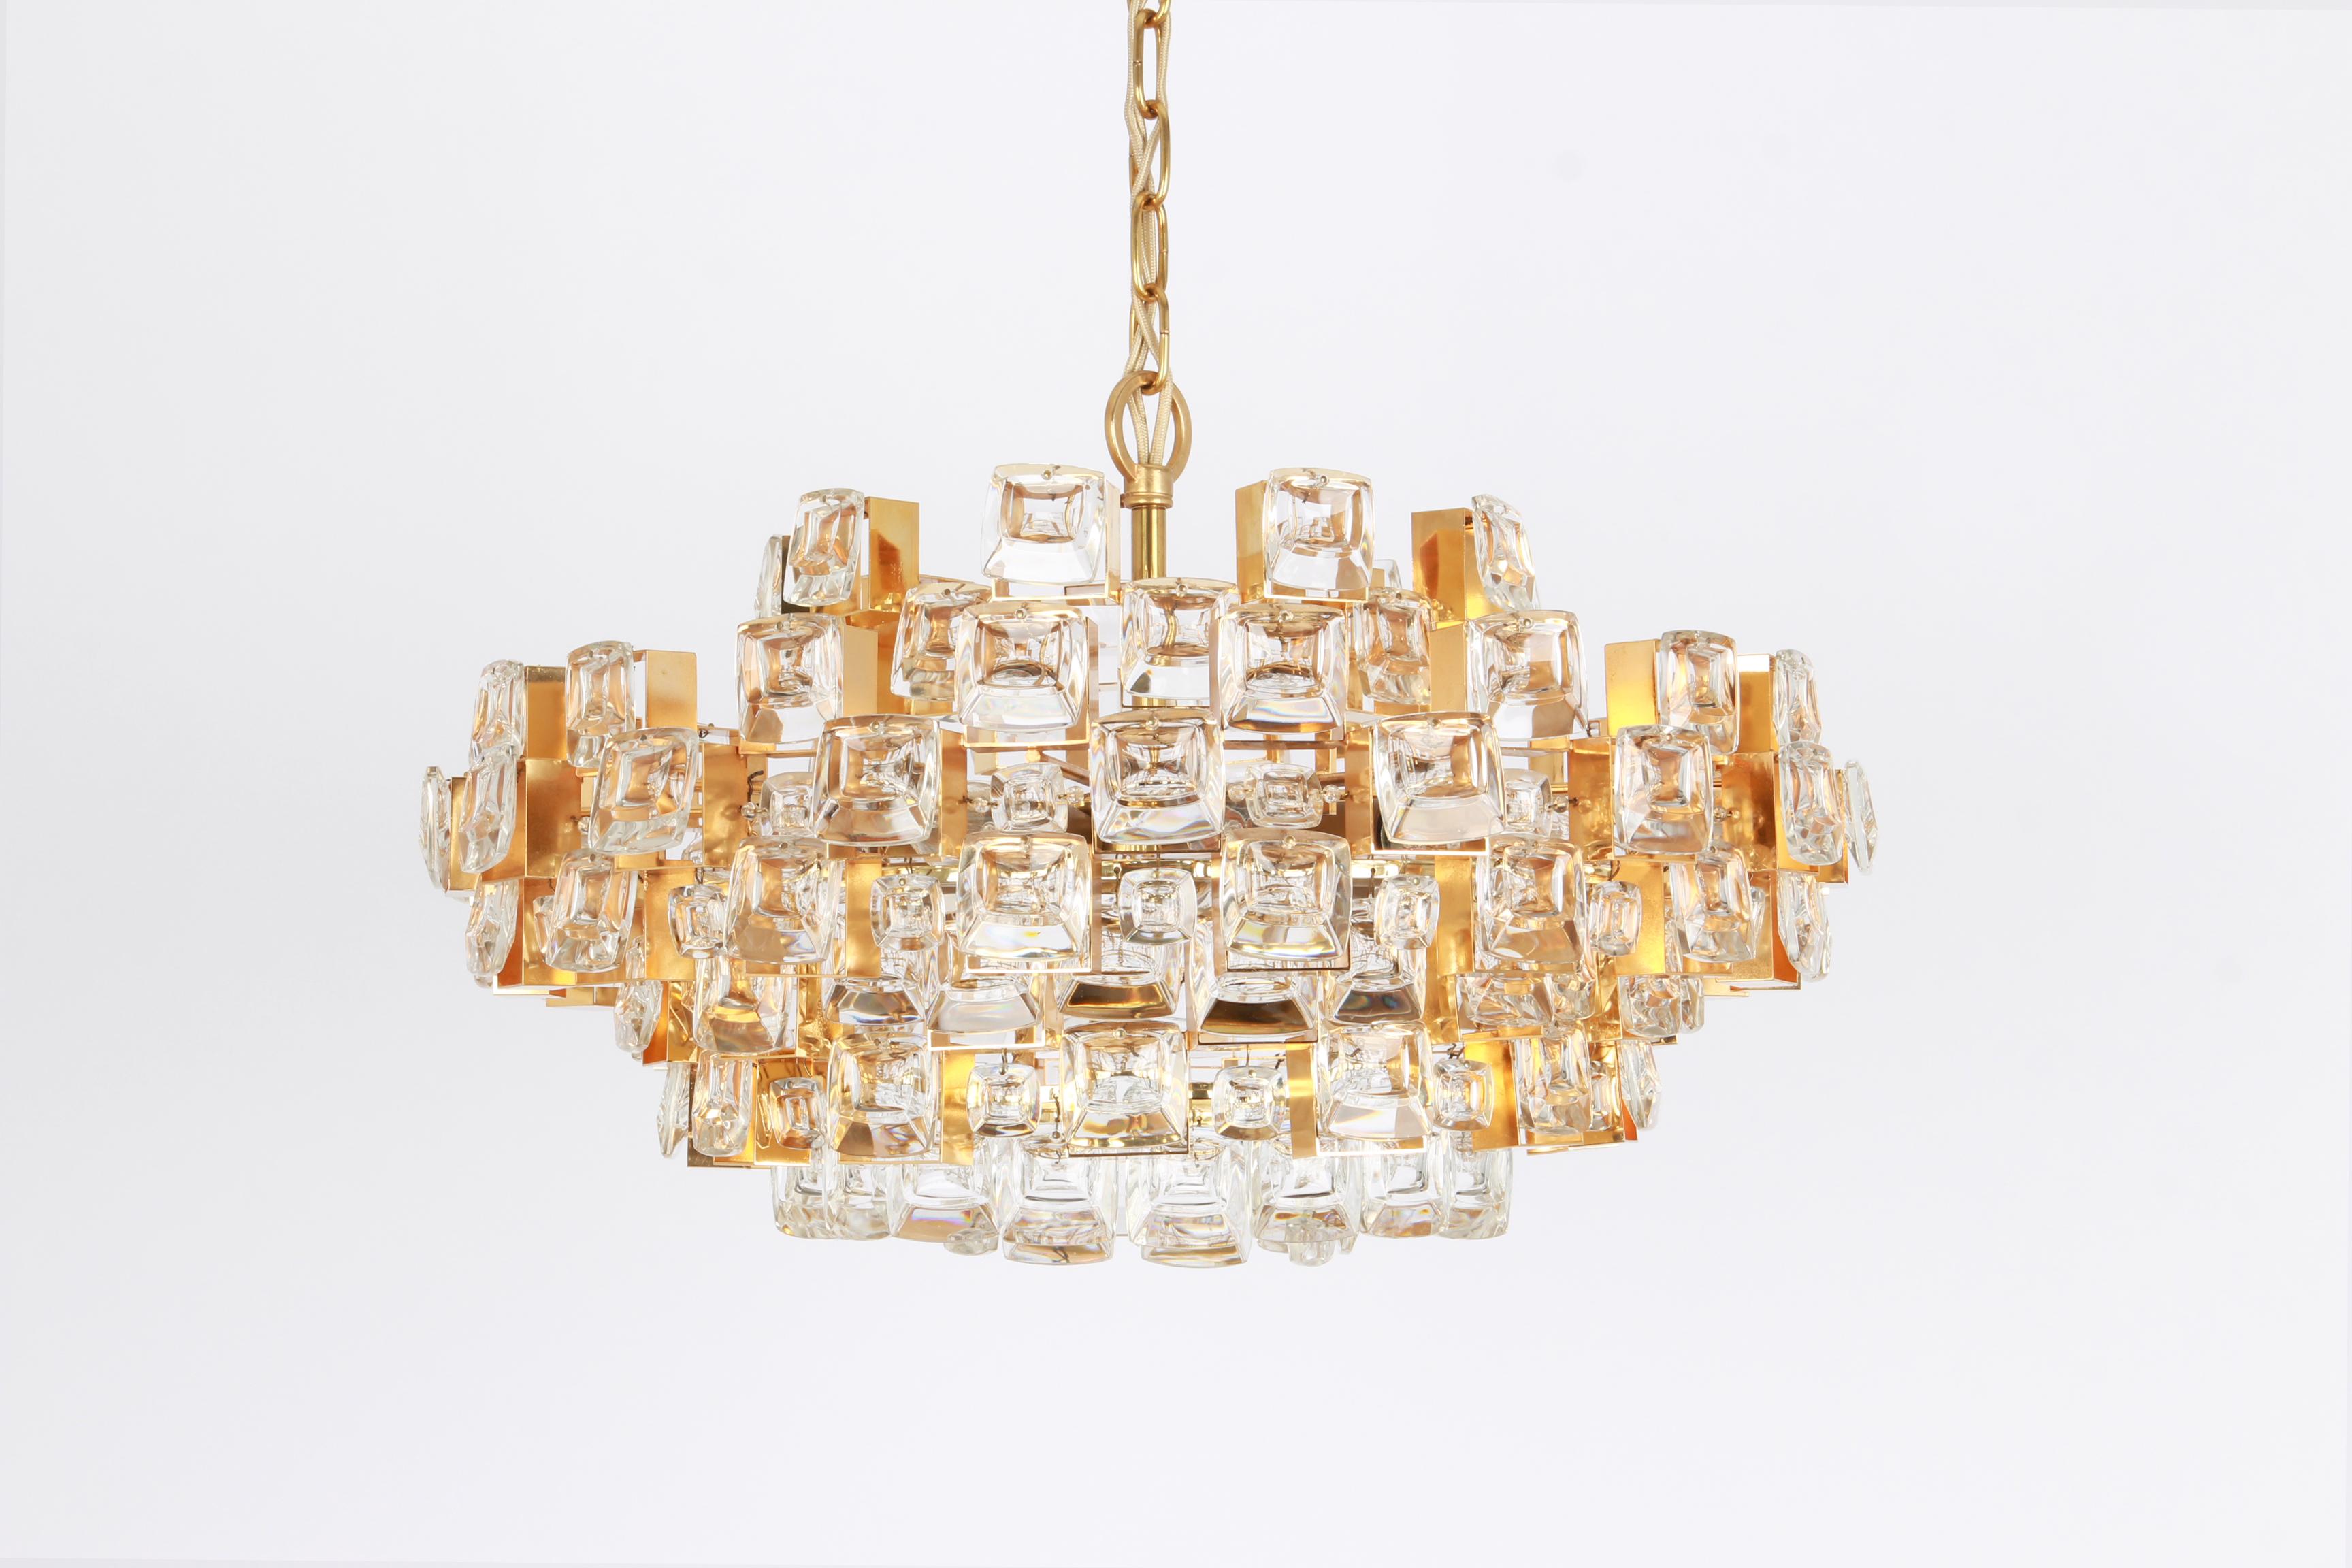 A wonderful and high quality gilded chandelier or pendant light fixture by Palwa -Design Sciolari, Germany, 1970s.

It is made of a 24 carat gold-plated brass frame decorated with individual 